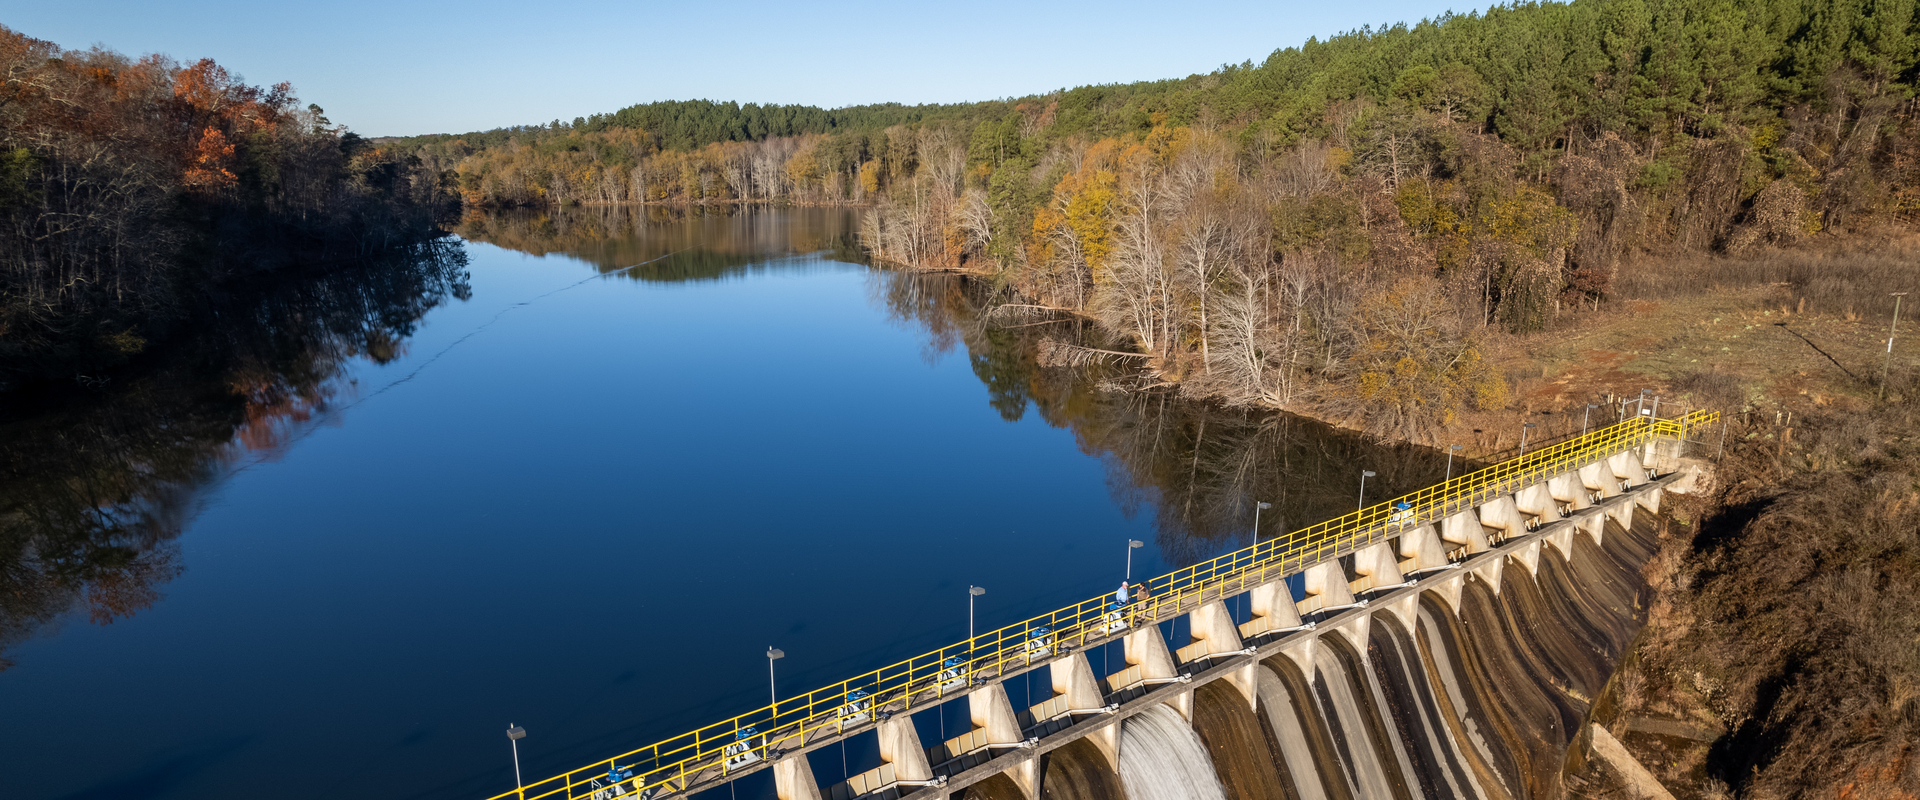 Rules and Regulations for Municipal Reservoir #1